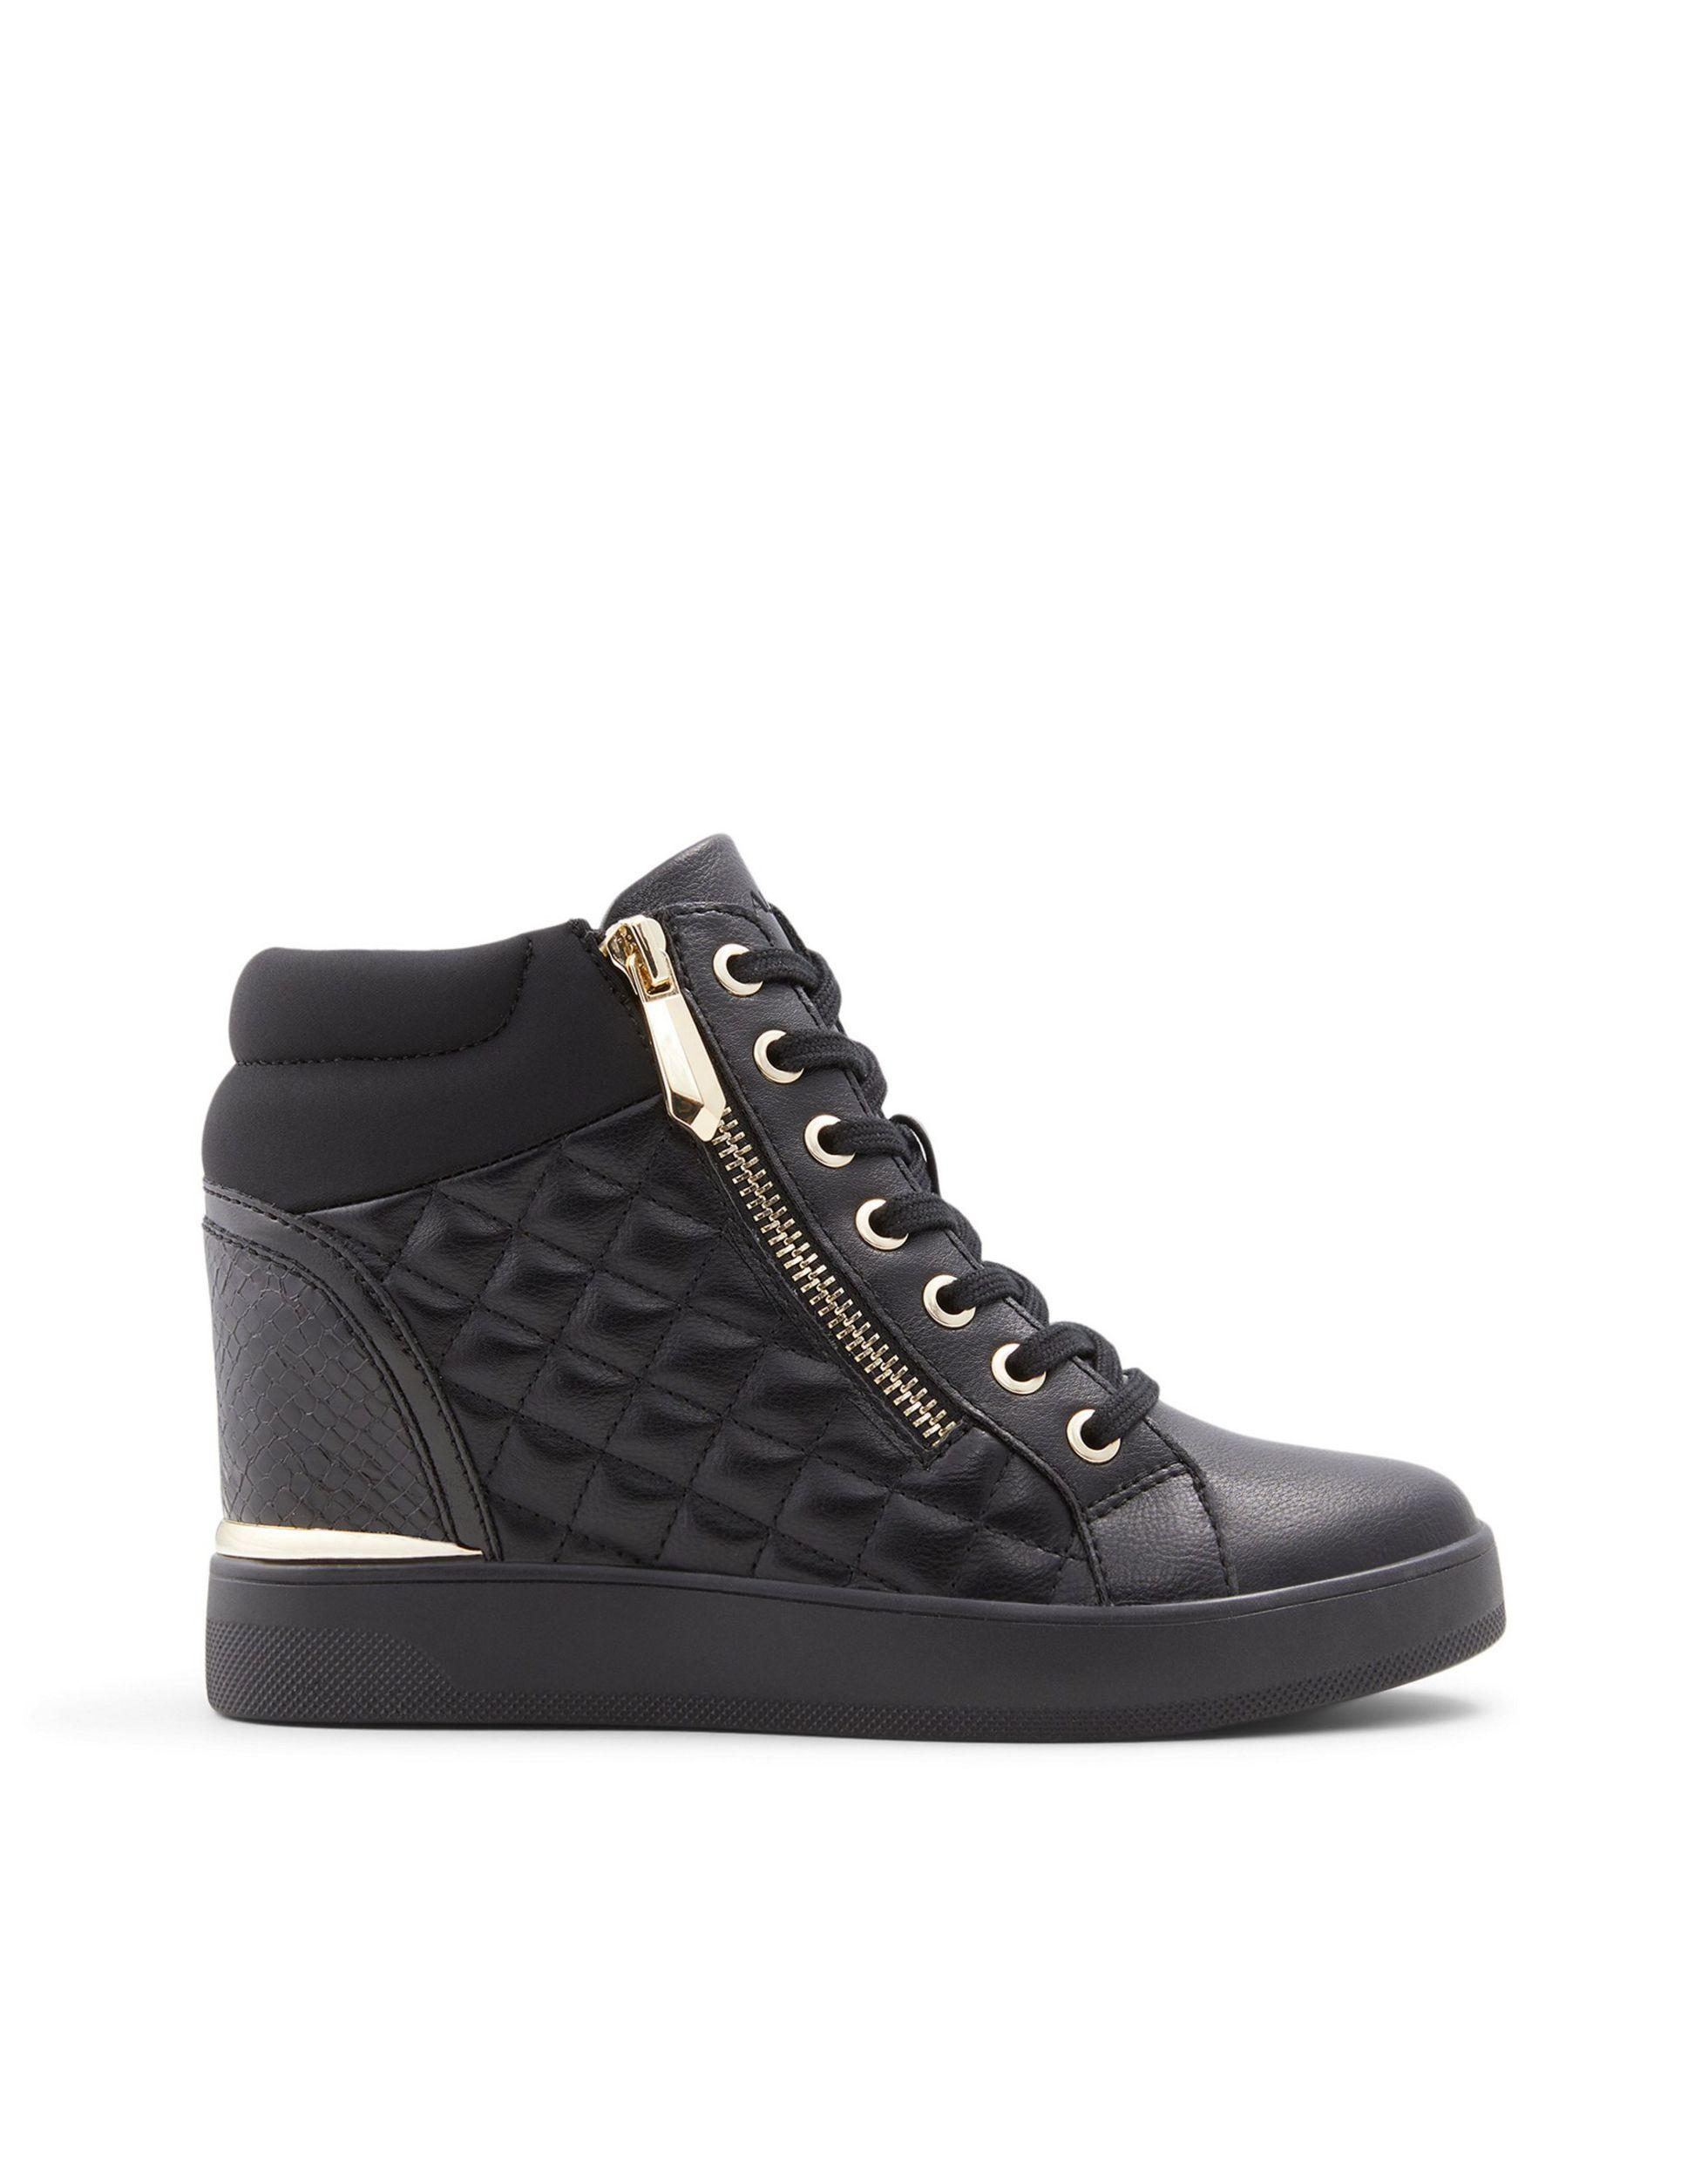 ALDO Ailanna Wedge Sneakers With Faux Fur in Black Lyst